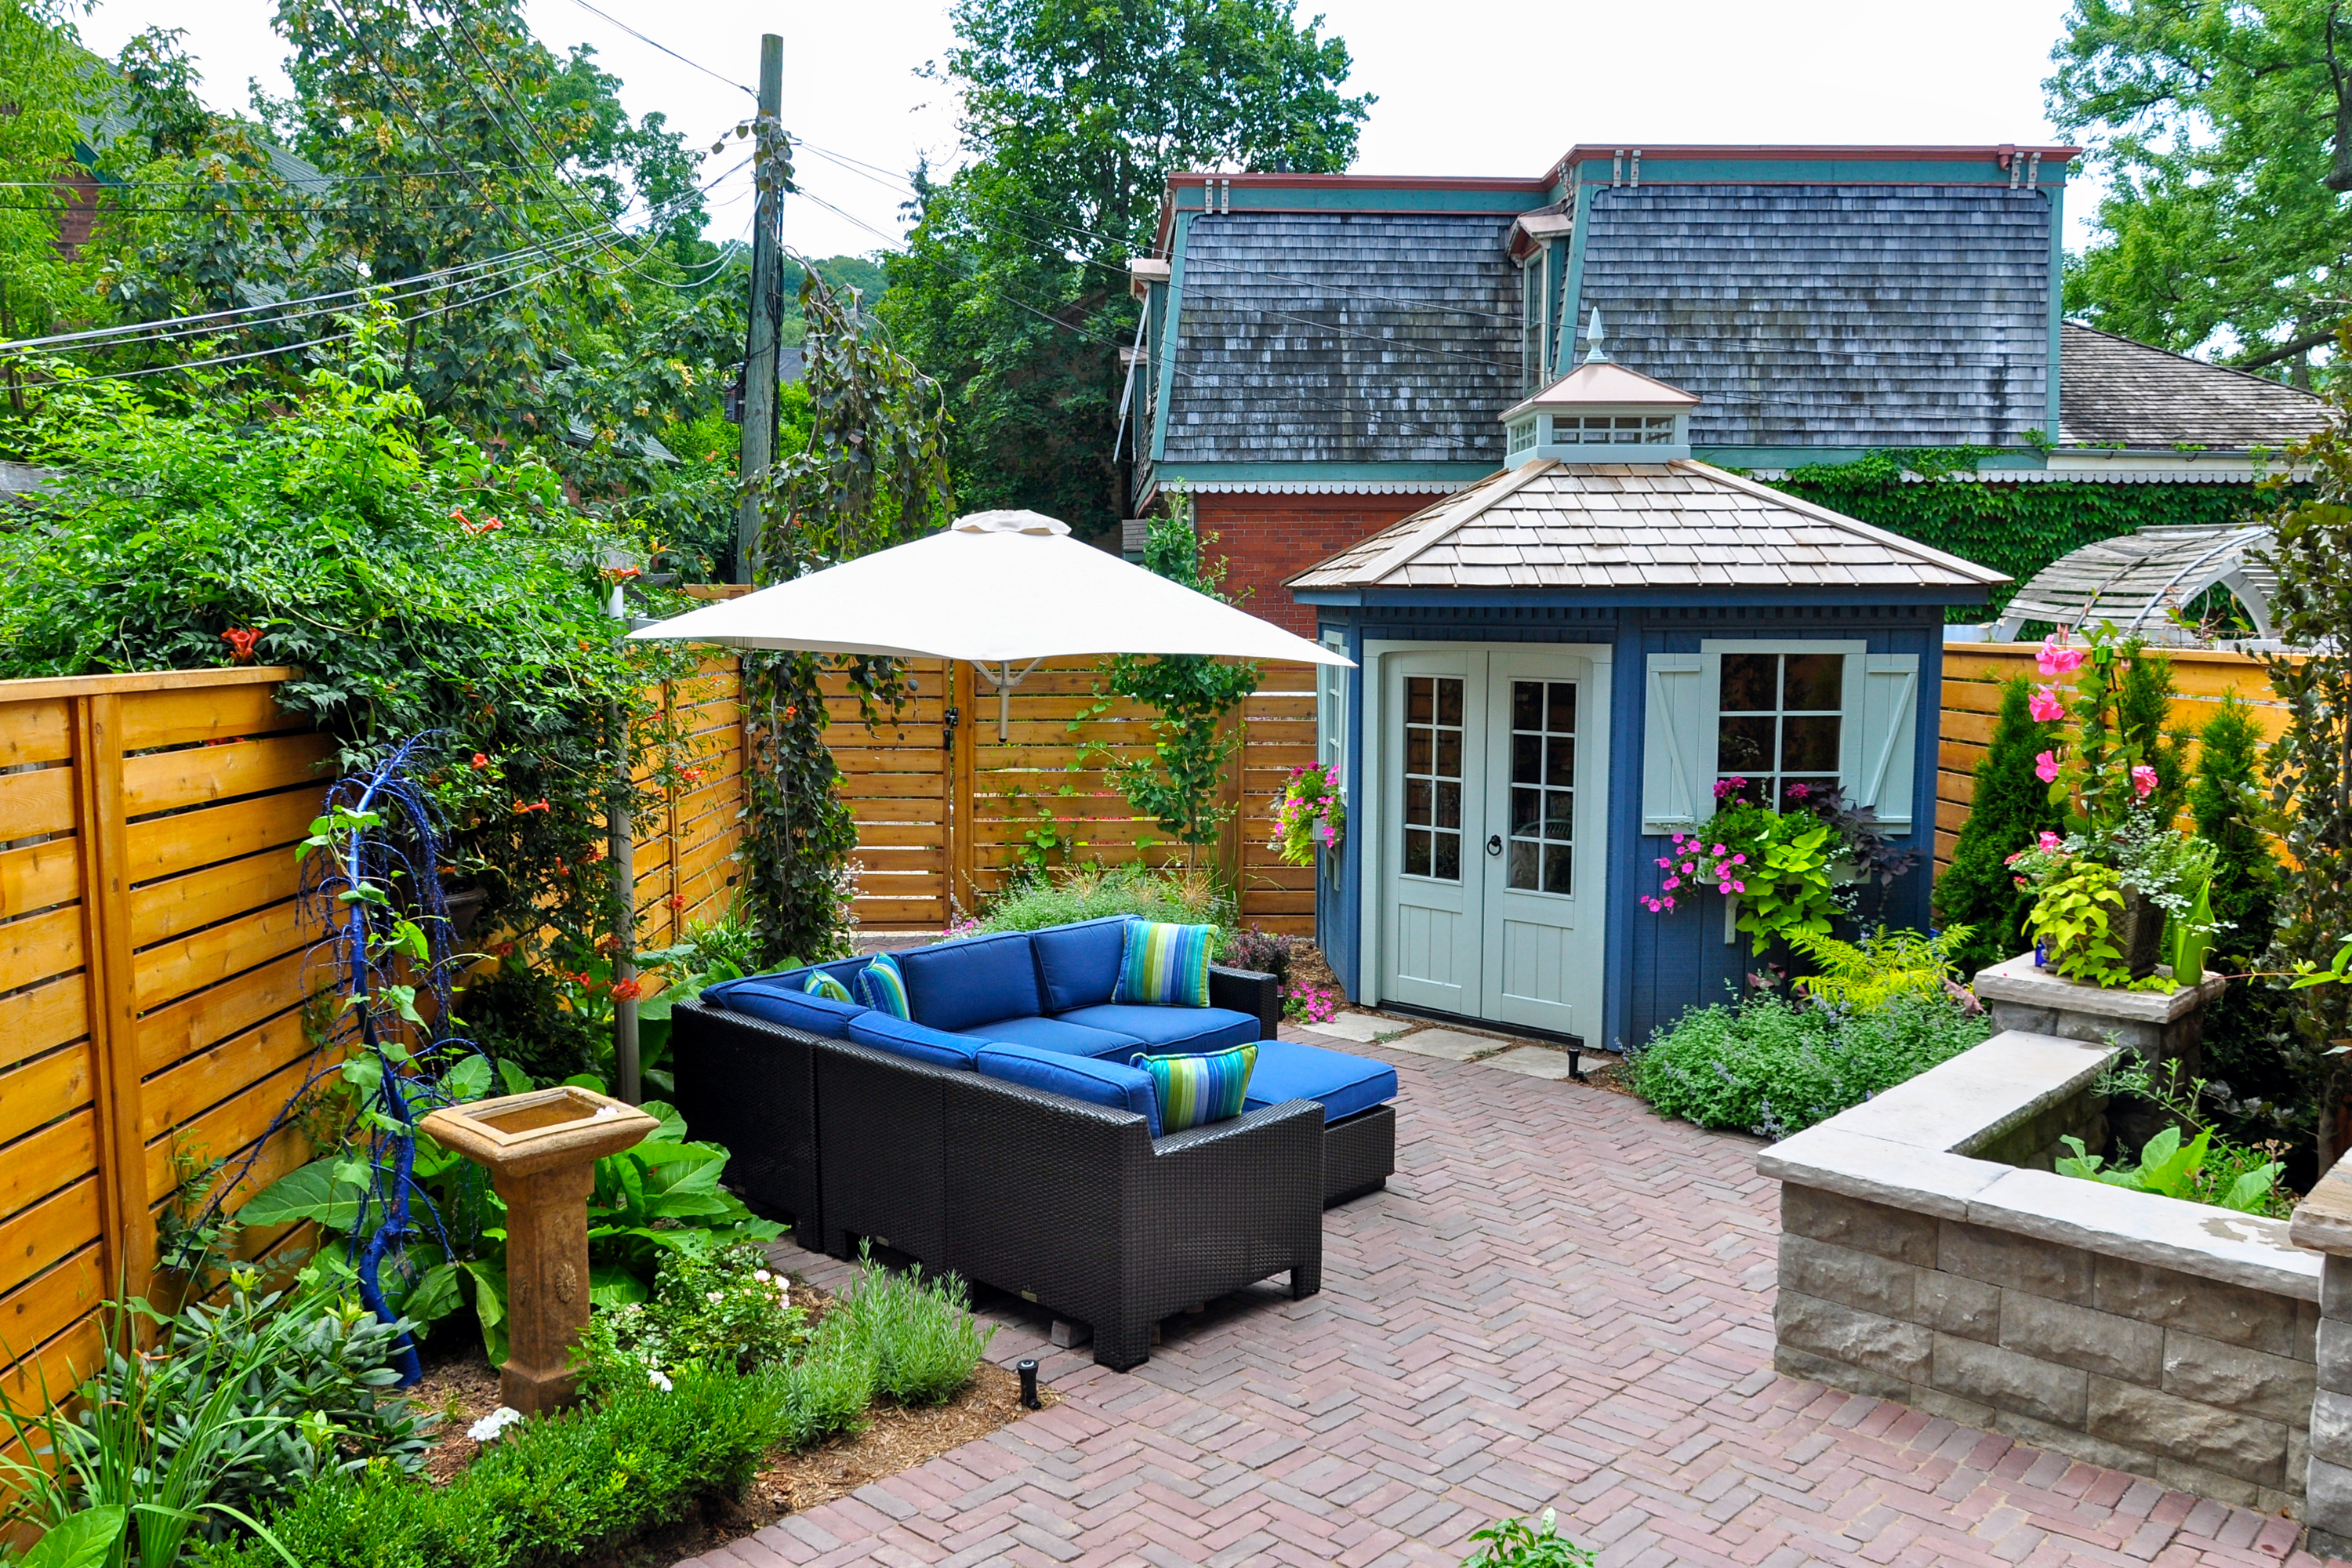 Backyard patio with pavers, plants, and furniture